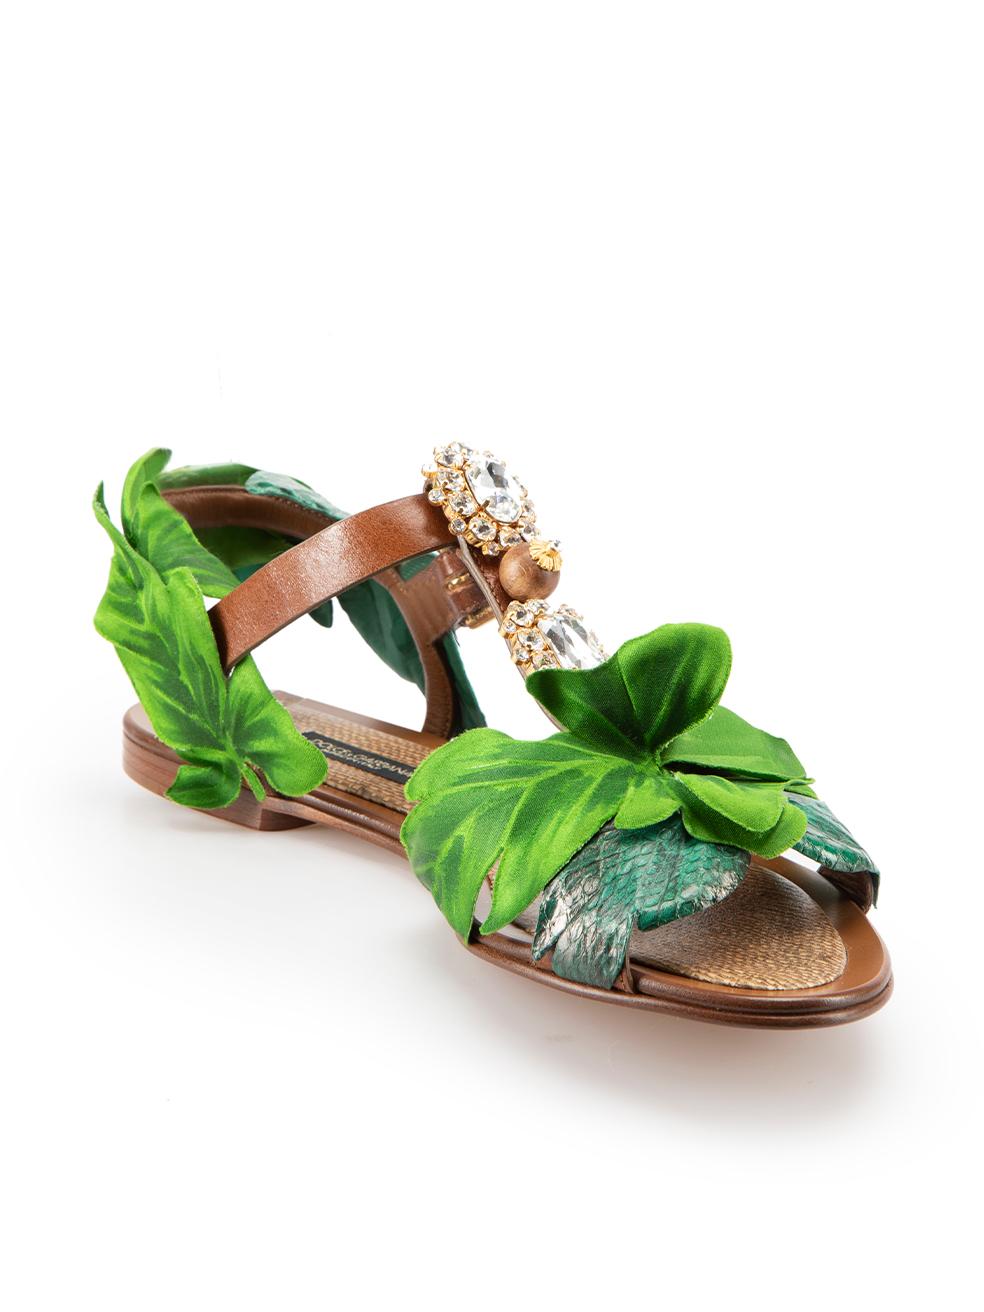 CONDITION is Never Worn. No visible wear to sandals is evident on this used Dolce & Gabbana designer resale item. These shoes come with original box.



Details


Brown

Leather

Sandals

Green leaves detail

Crystal embellished

Adjustable ankle